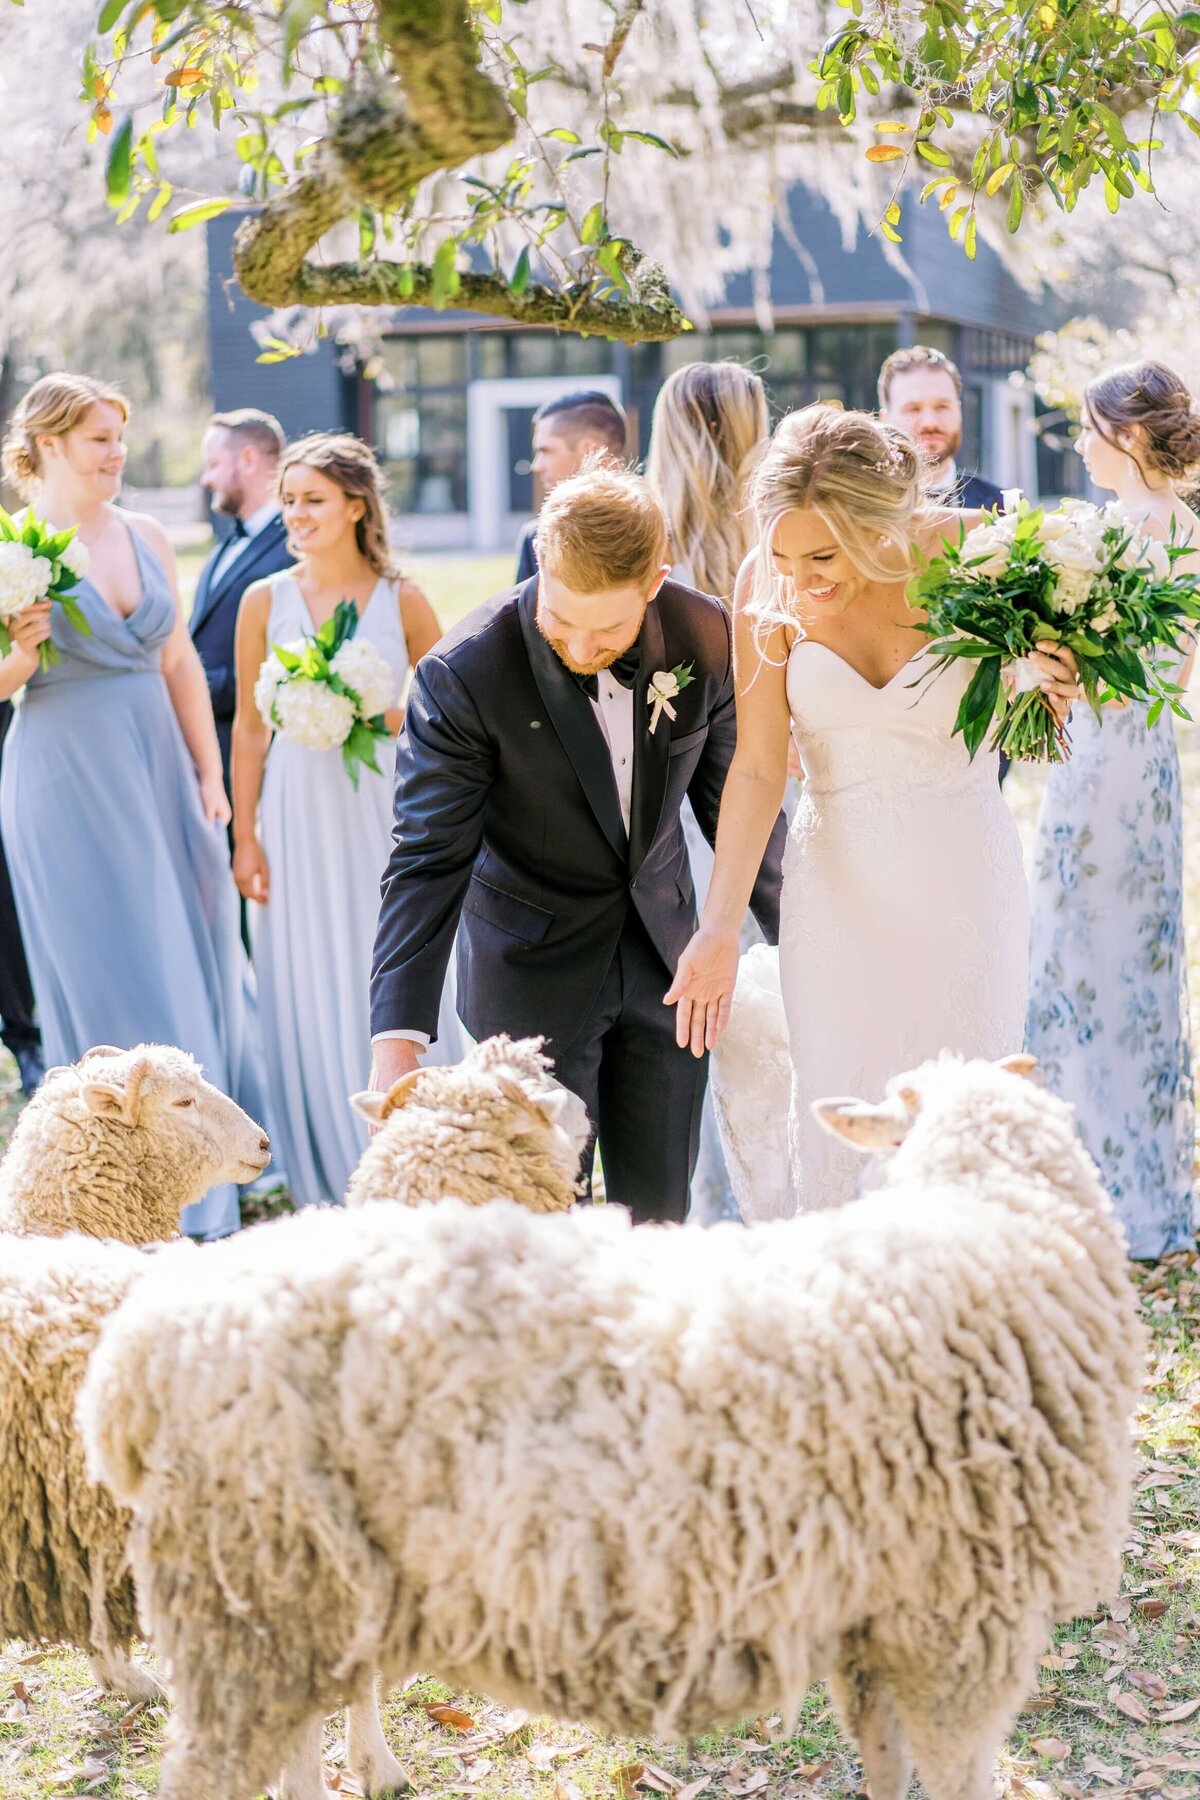 bride and groom with bridal party and sheep